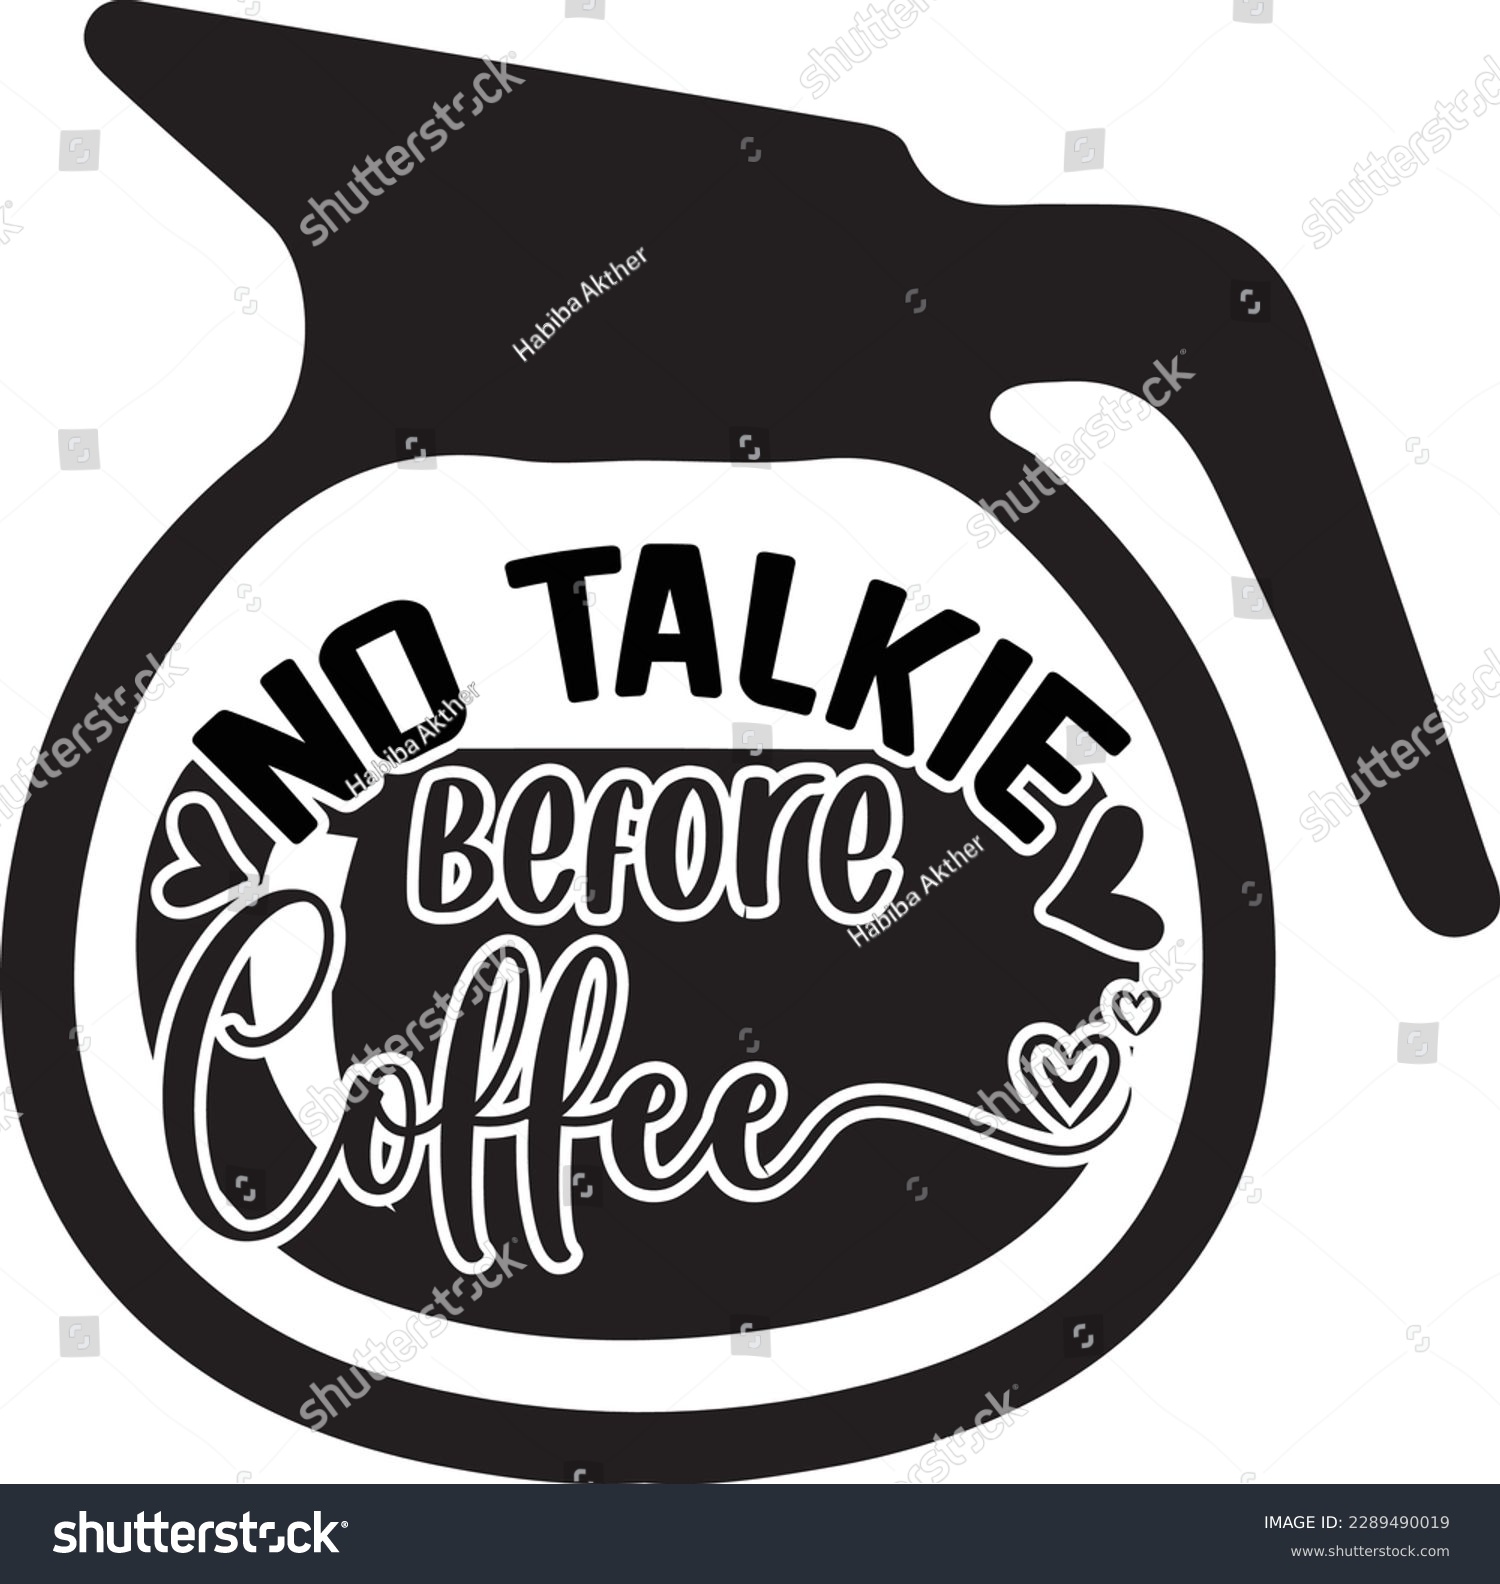 SVG of Retro Coffee SVG Bundle,Coffee SVG Bundle,Funny Coffee SVG,Caffeine Queen,Coffee Lovers,Coffee Obsessed,Coffee mug,silhouette,Jesus,Iced coffee,heart steam,Aesthetic svg,Hippie svg, svg